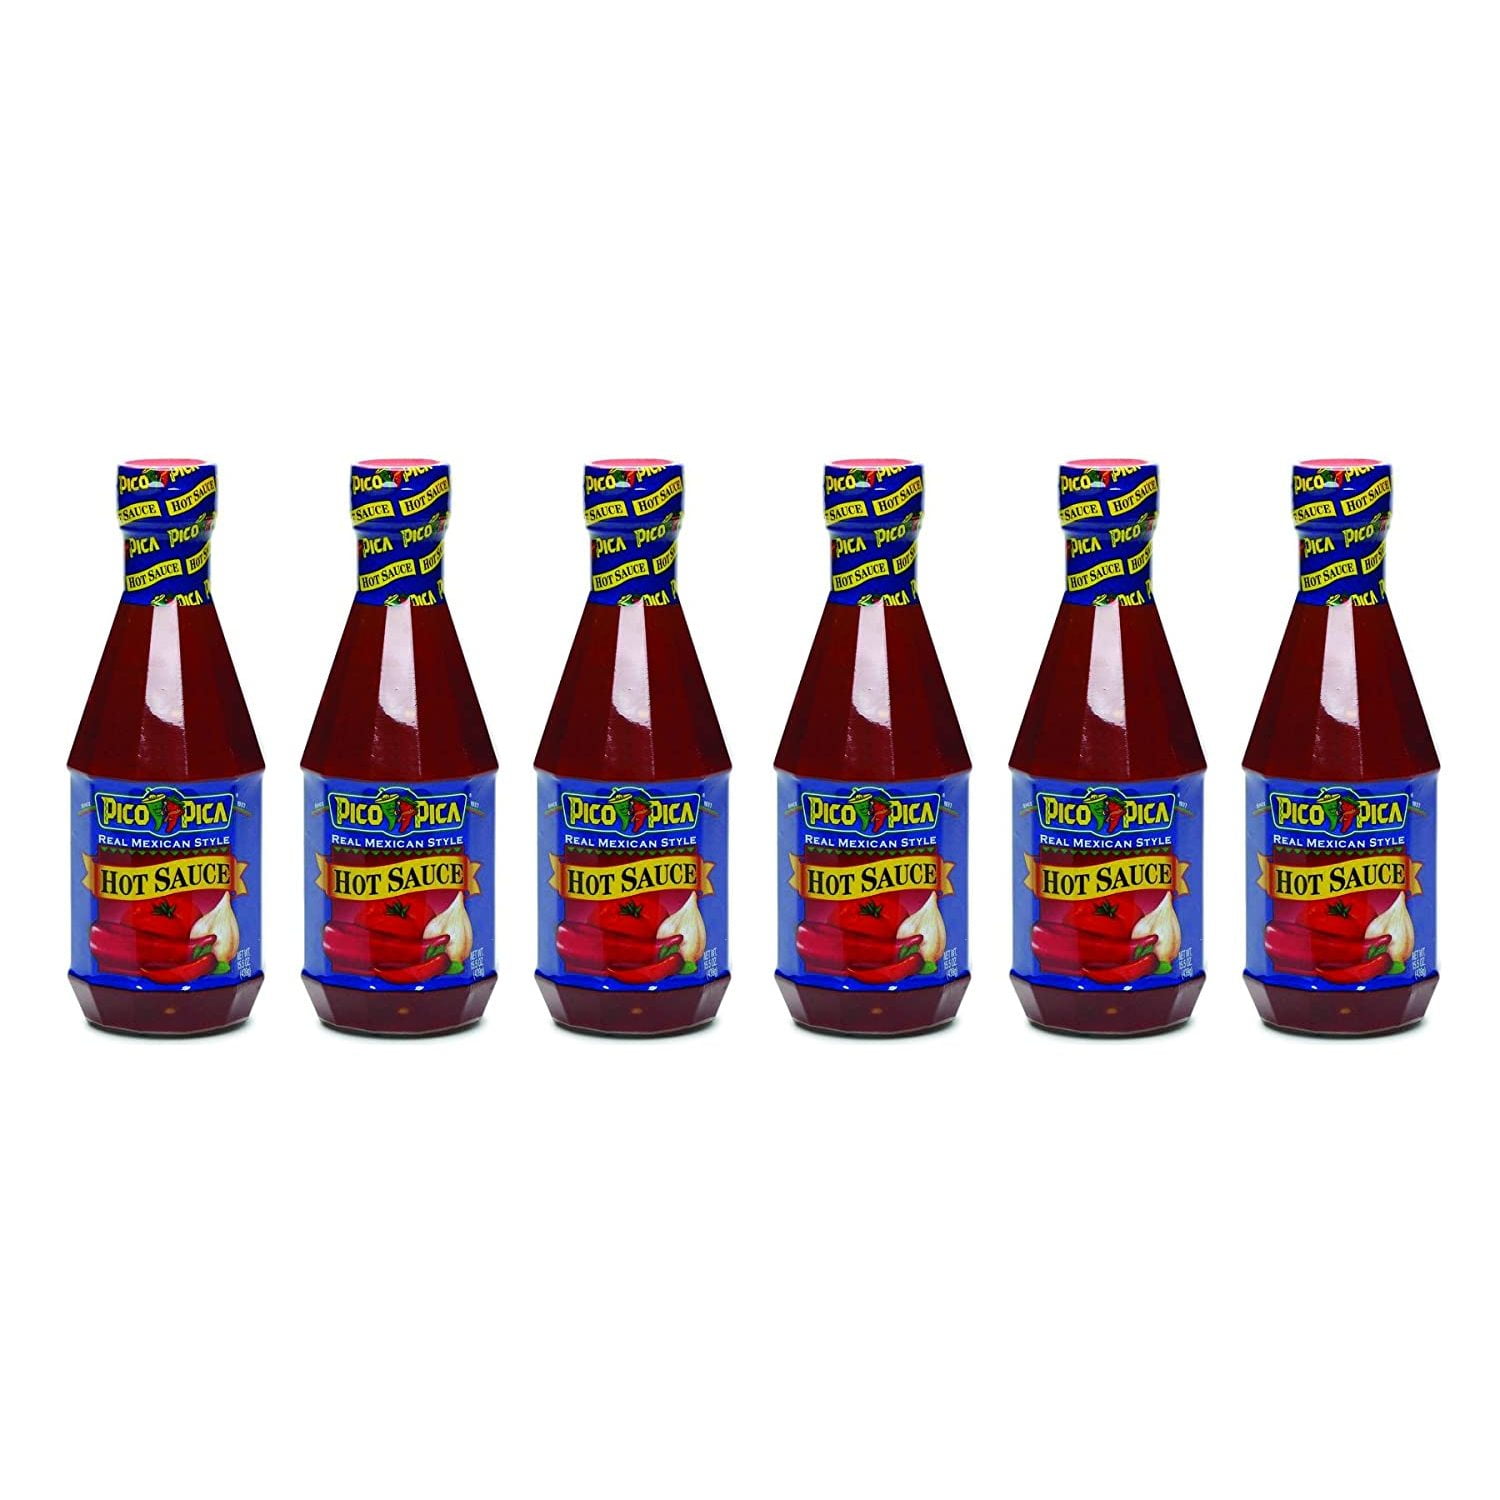 Pico Pica Real Mexican Style Hot Sauce / Free U.S.A. Shipping